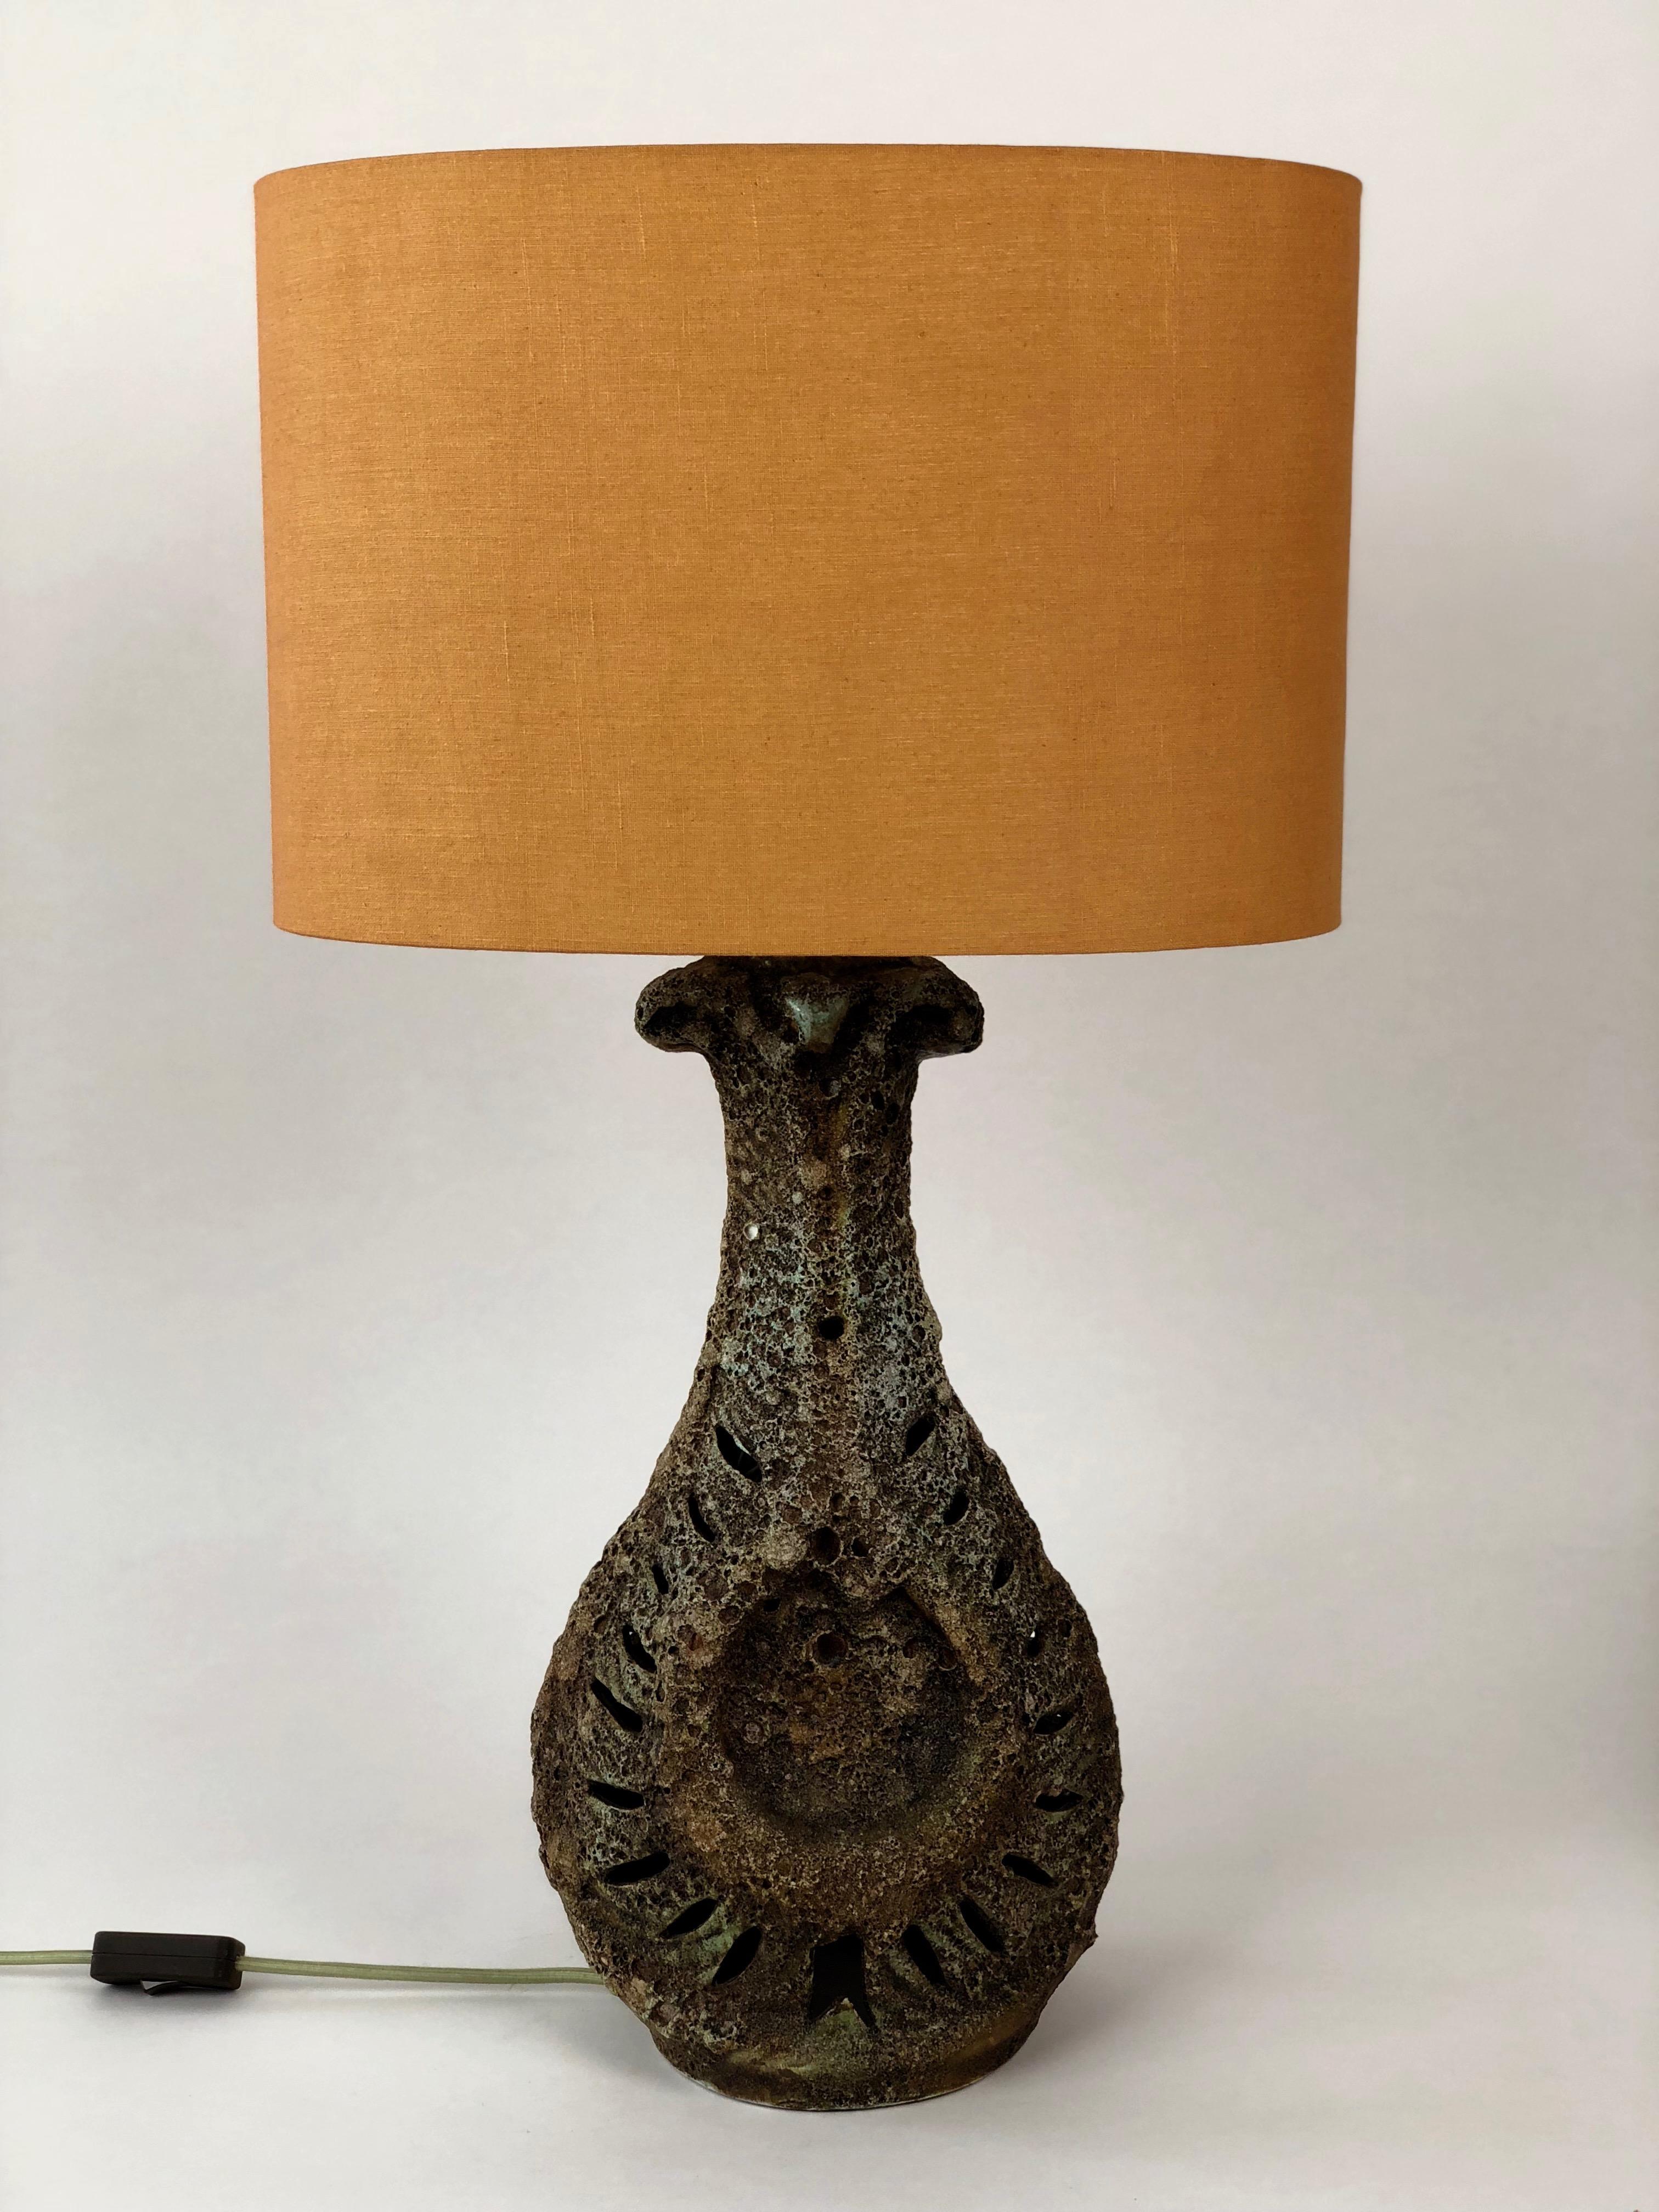 Large and dramatic table lamp made from ceramic with a lava glaze.
The lamp shade is oval in form and in burnt orange linen.
The base also has a light bull inside. When illuminated the lamp has a big dramatic effect.
The lamp is rewired with a